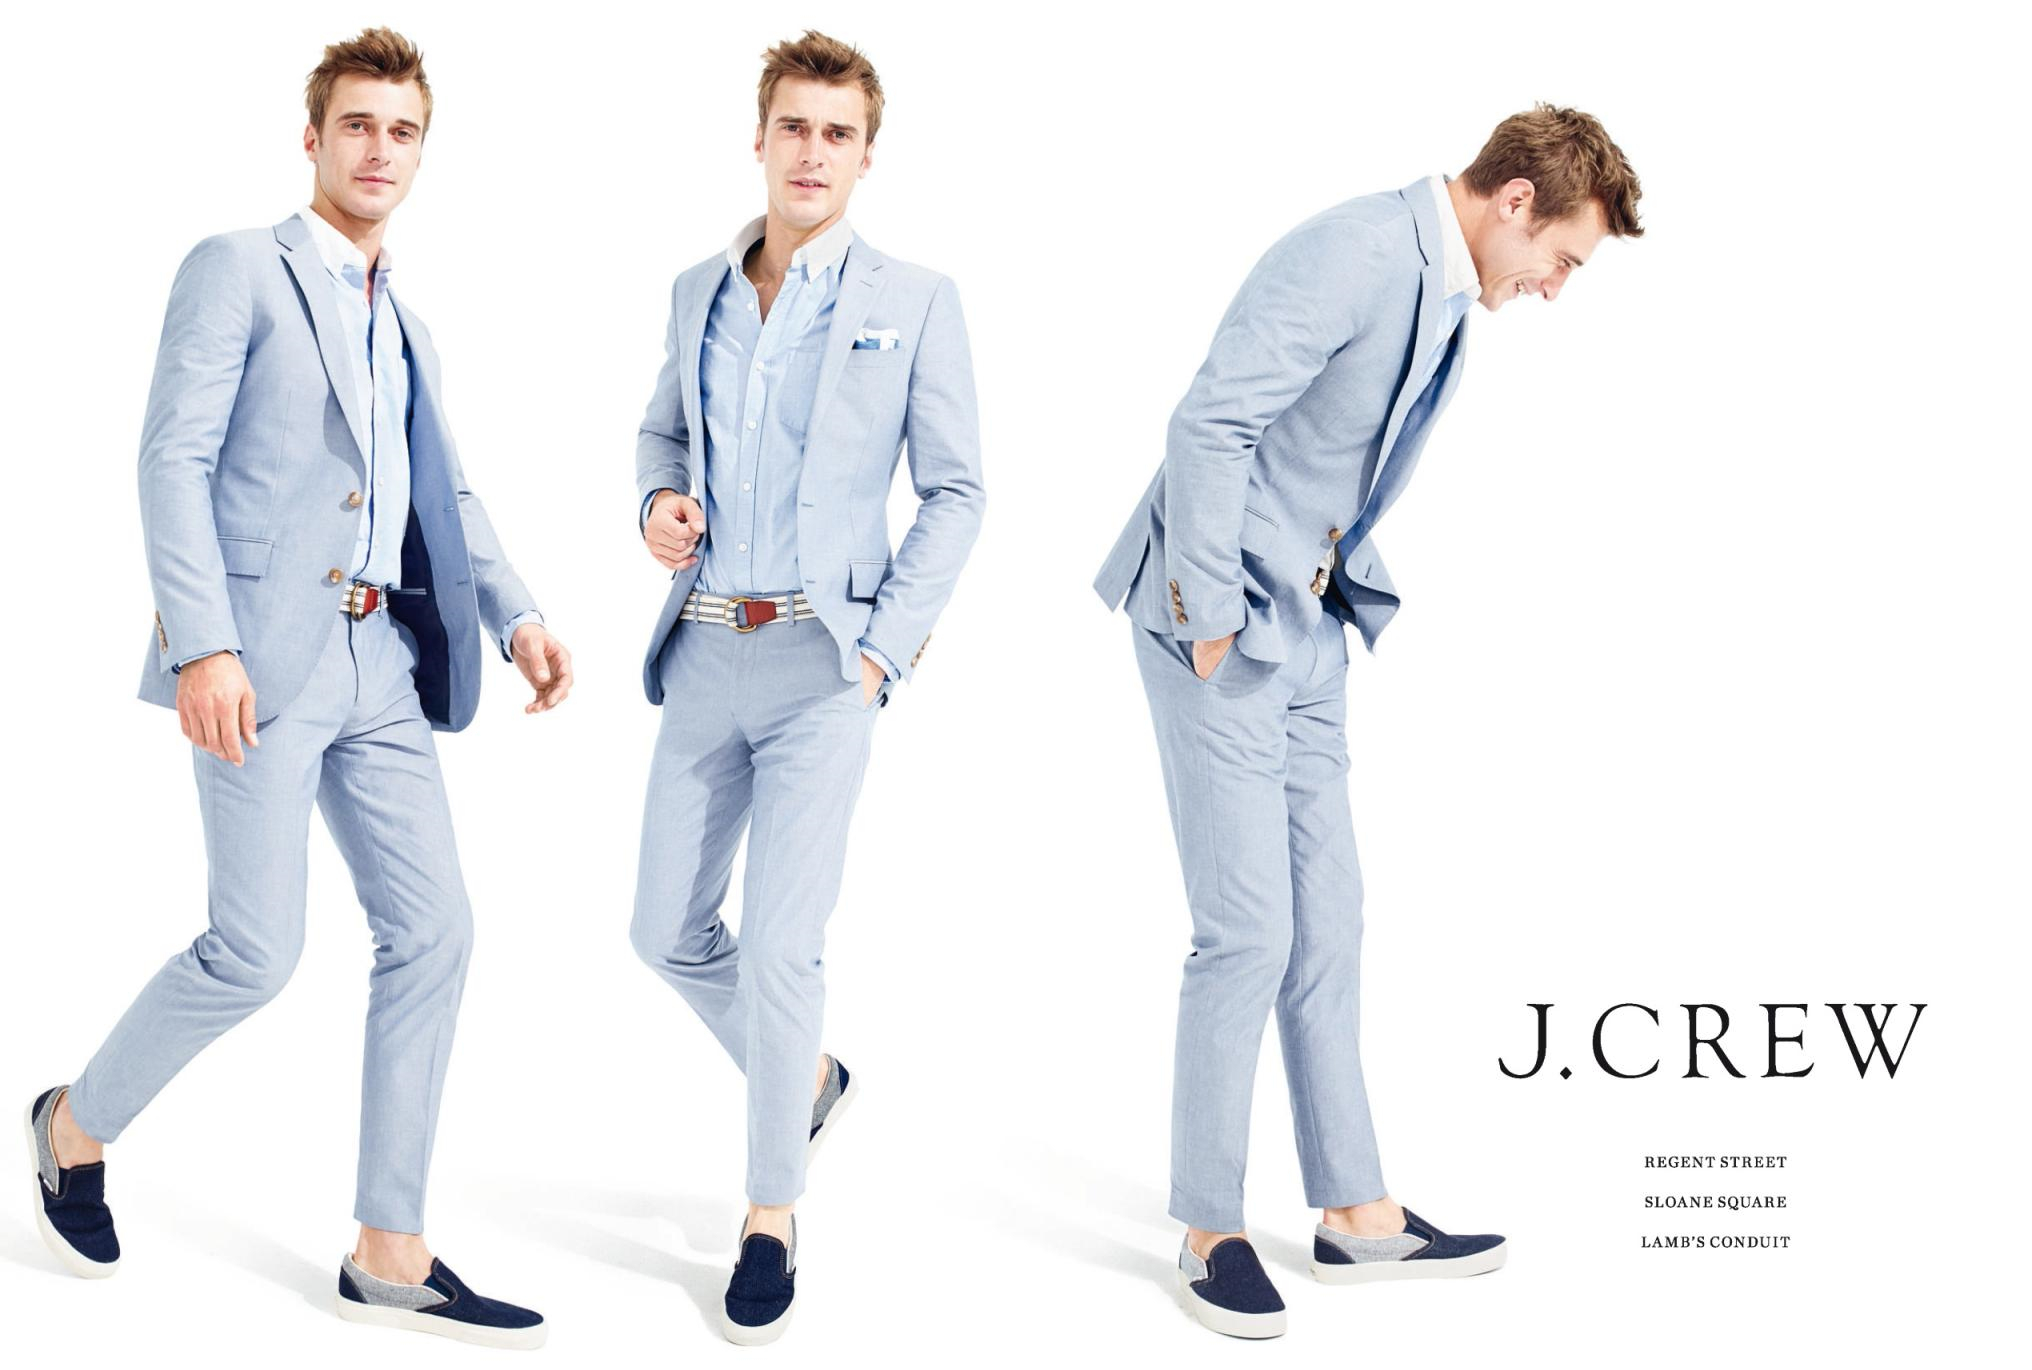 Clement Chabernaud JCrew Spring Summer 2015 Campaign